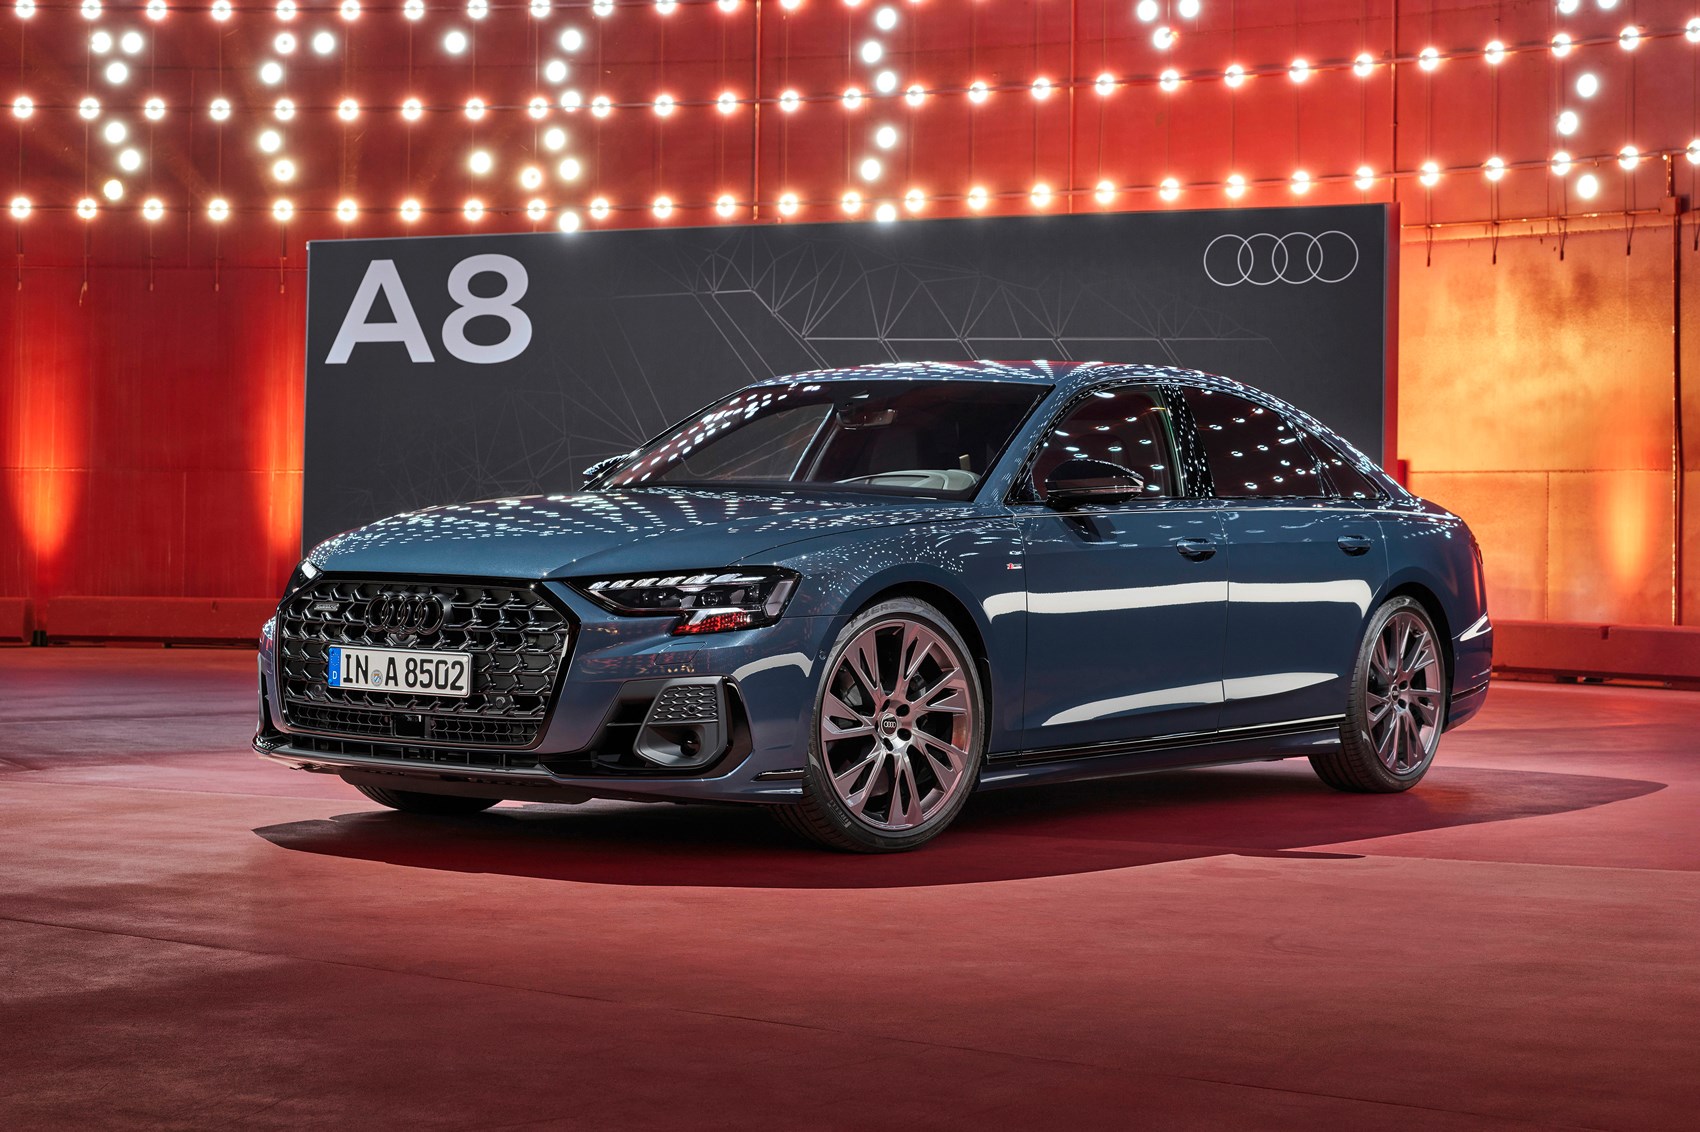 This is the newly facelifted Audi A8